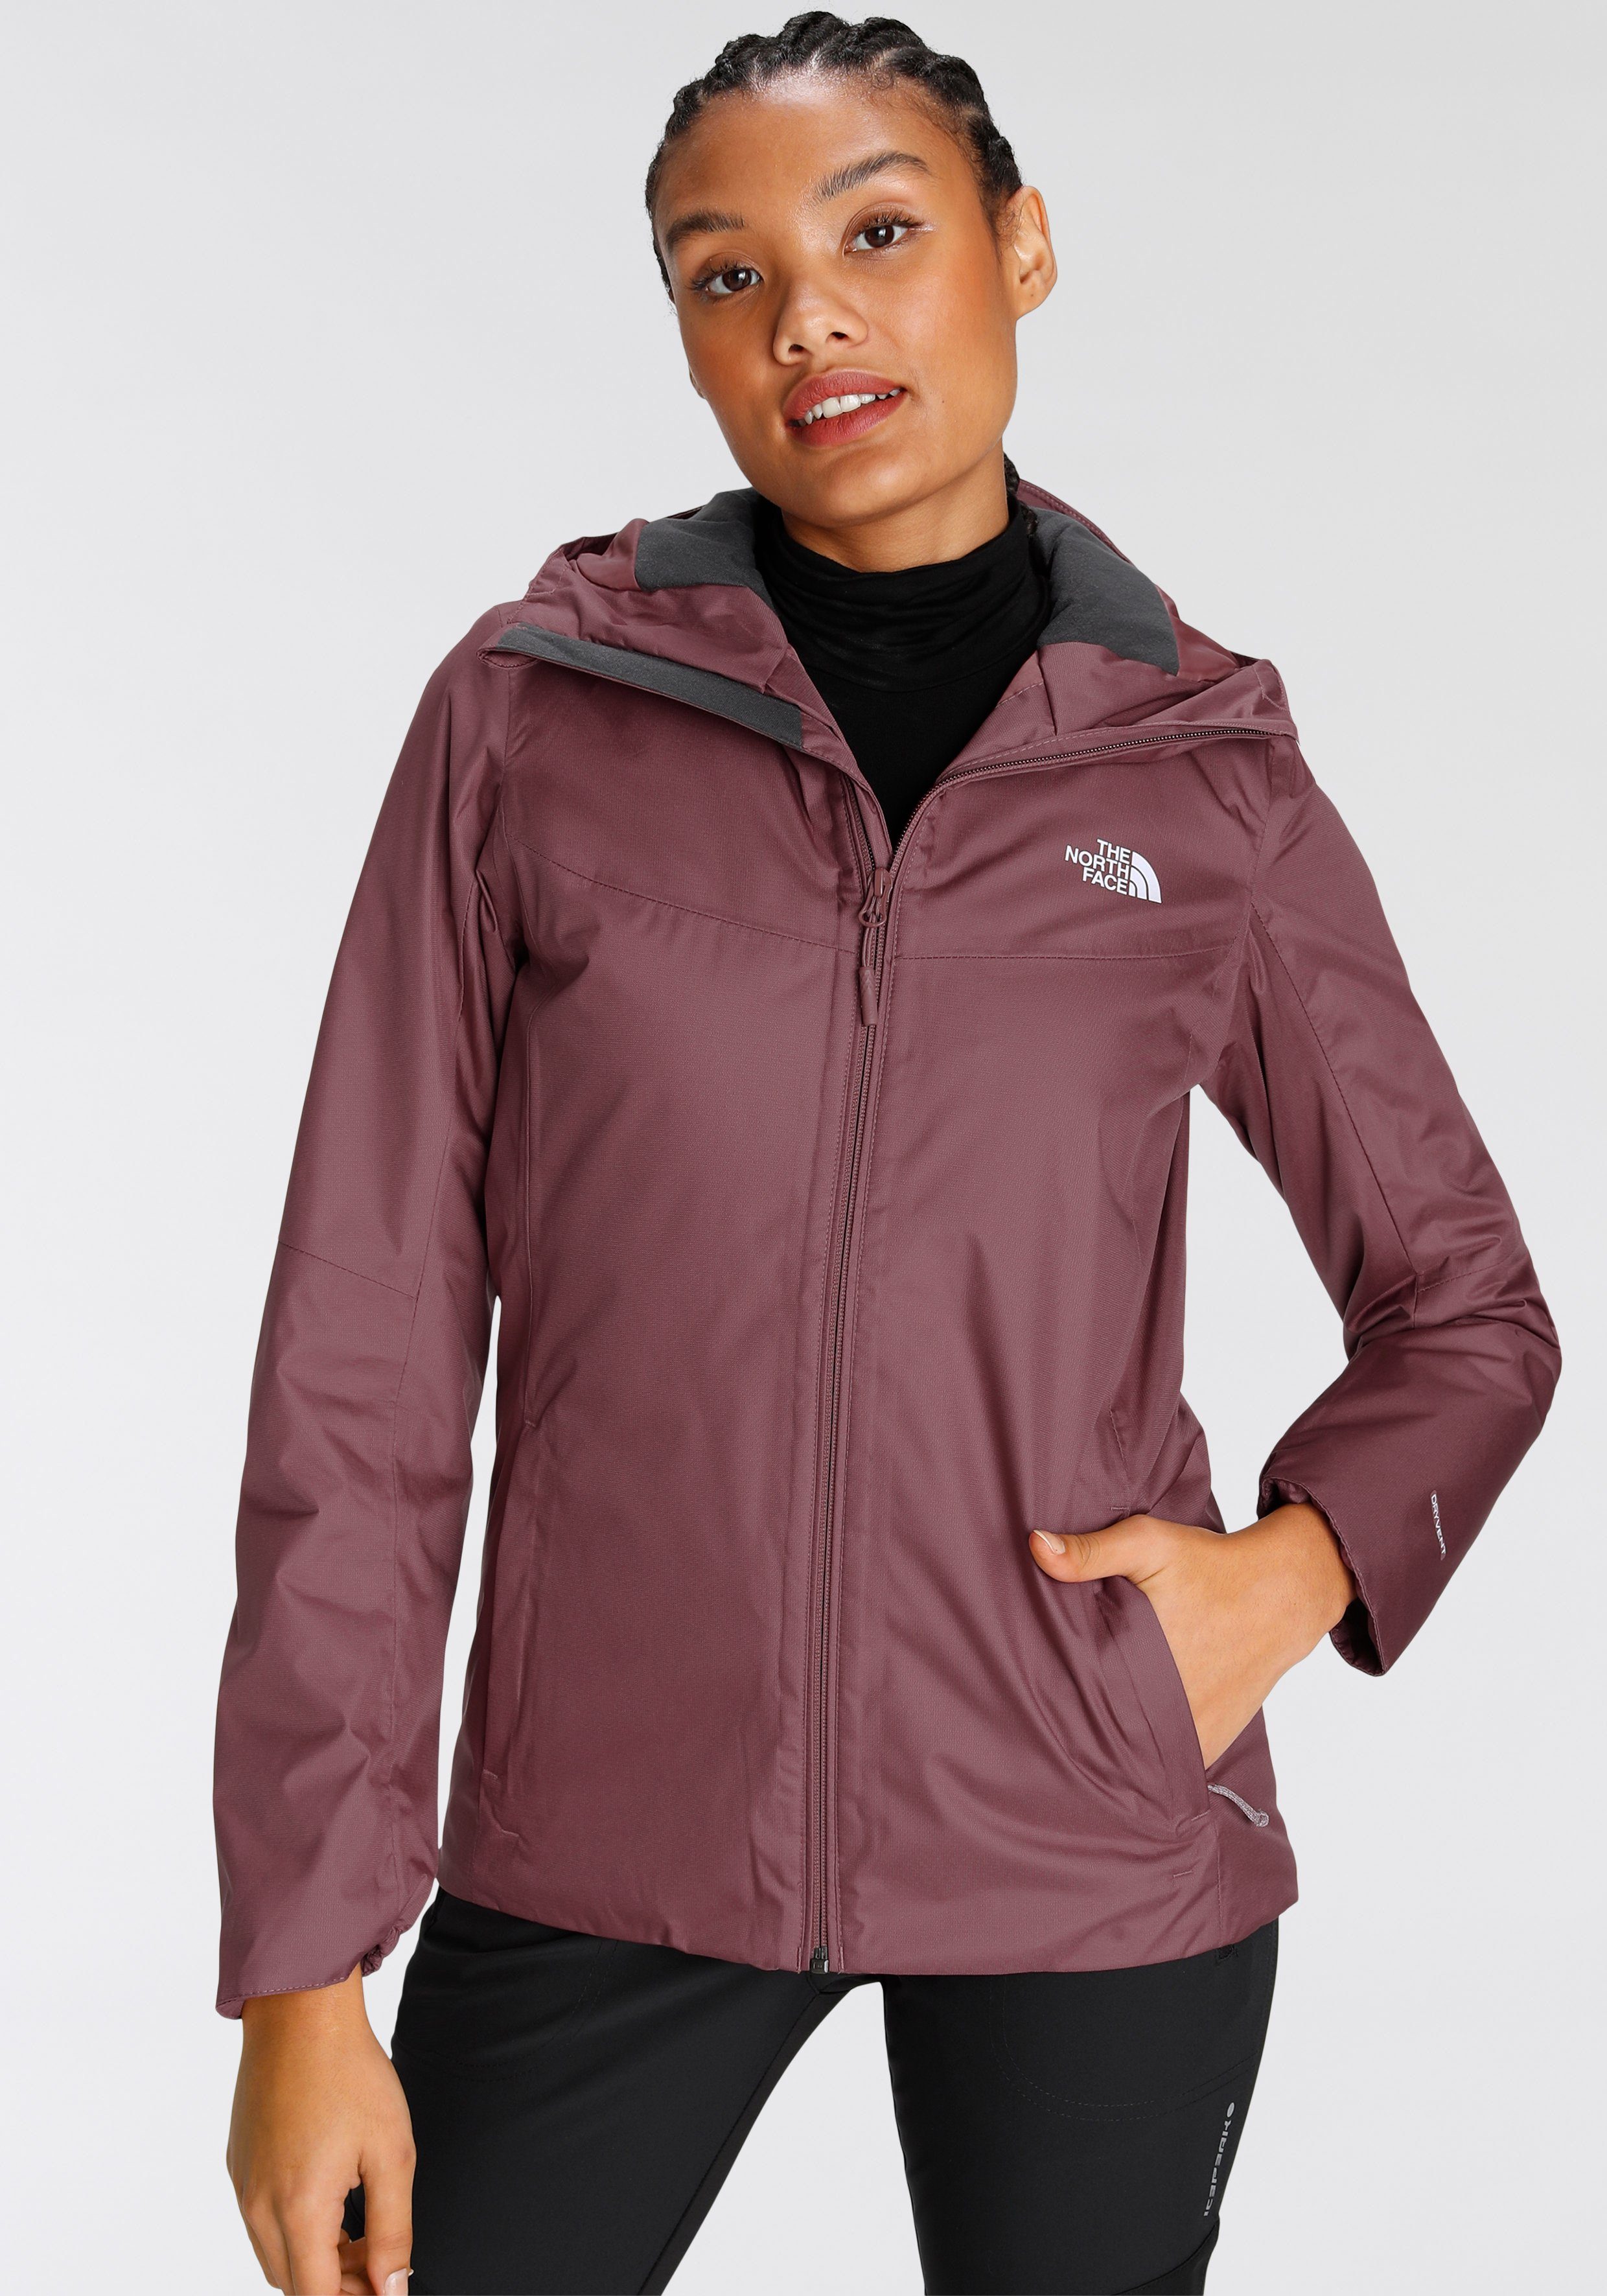 The North Face Funktionsjacke QUEST online kaufen | OTTO